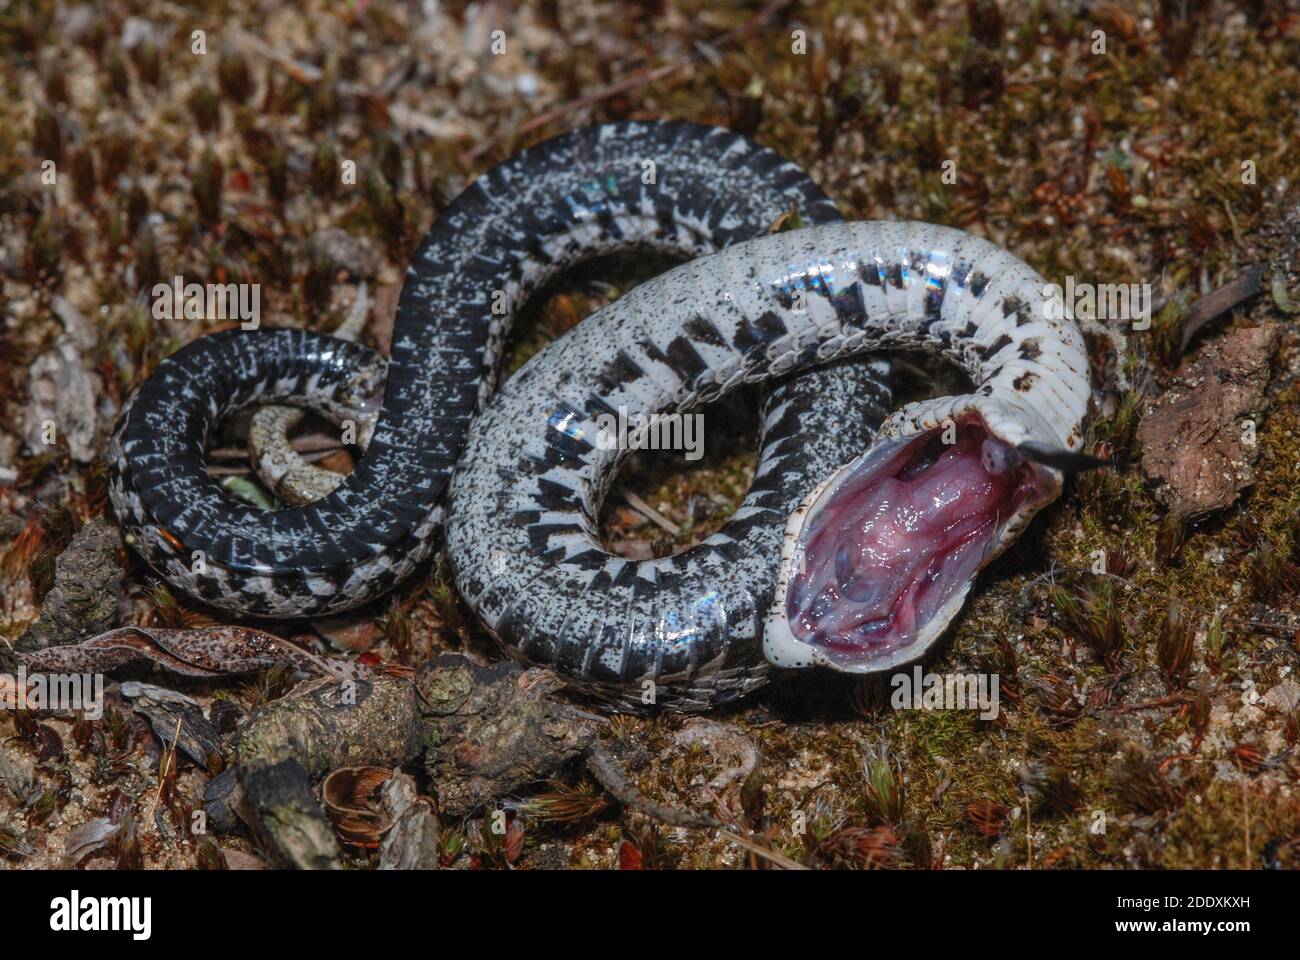 Grass snake juvenile playing dead, Alvao, Portugal - Stock Image -  C041/6117 - Science Photo Library